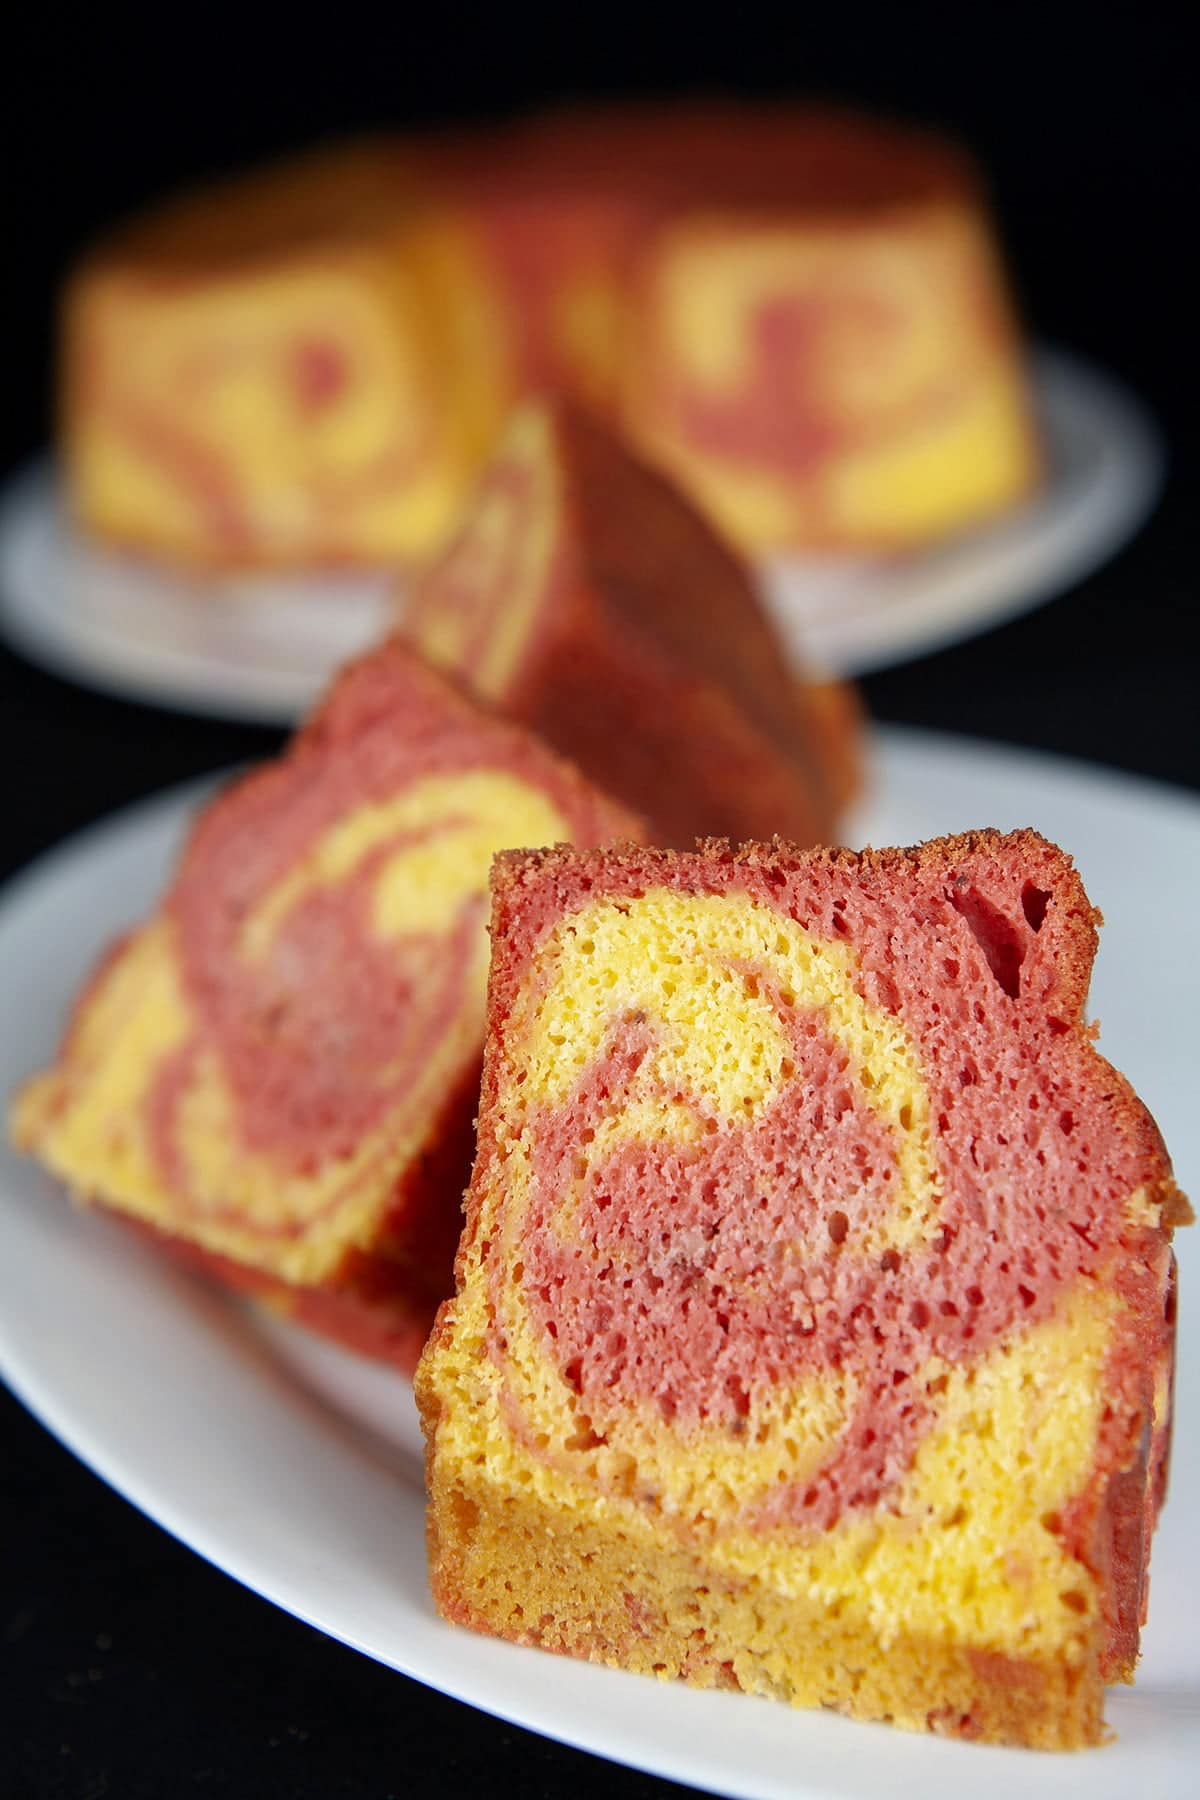 A plate of sliced strawberry mango marble cake slices rests in front of the cake it was cut from. The cake is made of brightly coloured pink and orange batters, marbled together,